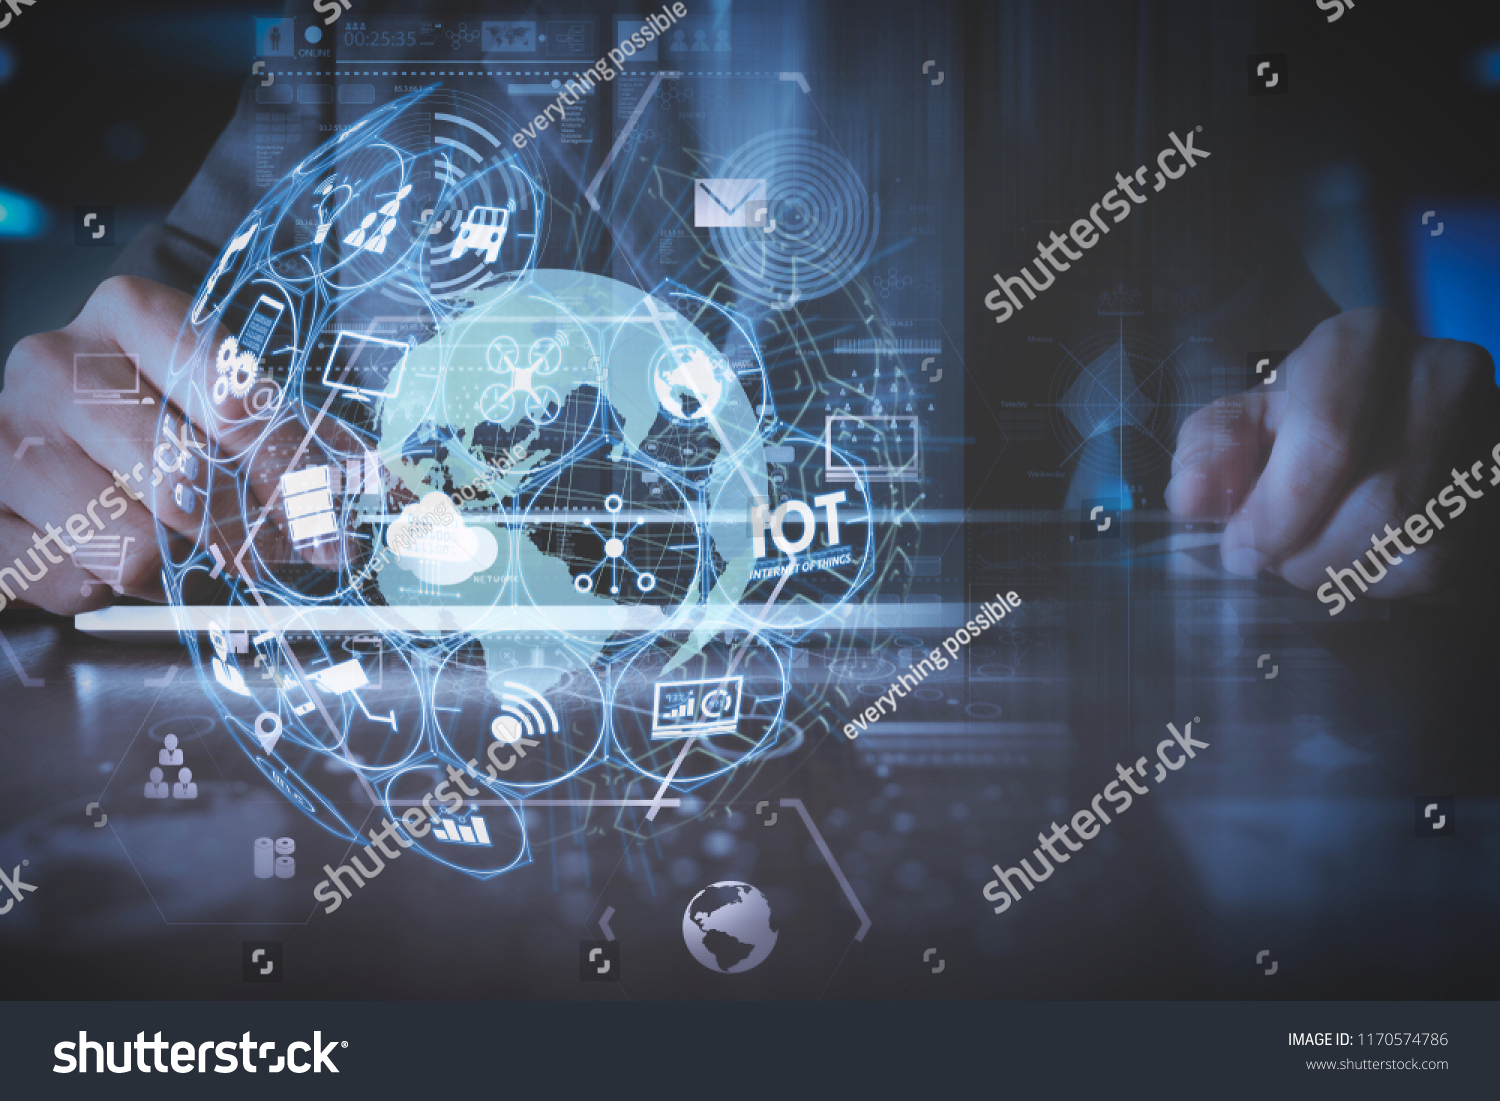 Internet Things Iot Technology Ar Augmented Stock Photo 1170574786 ...